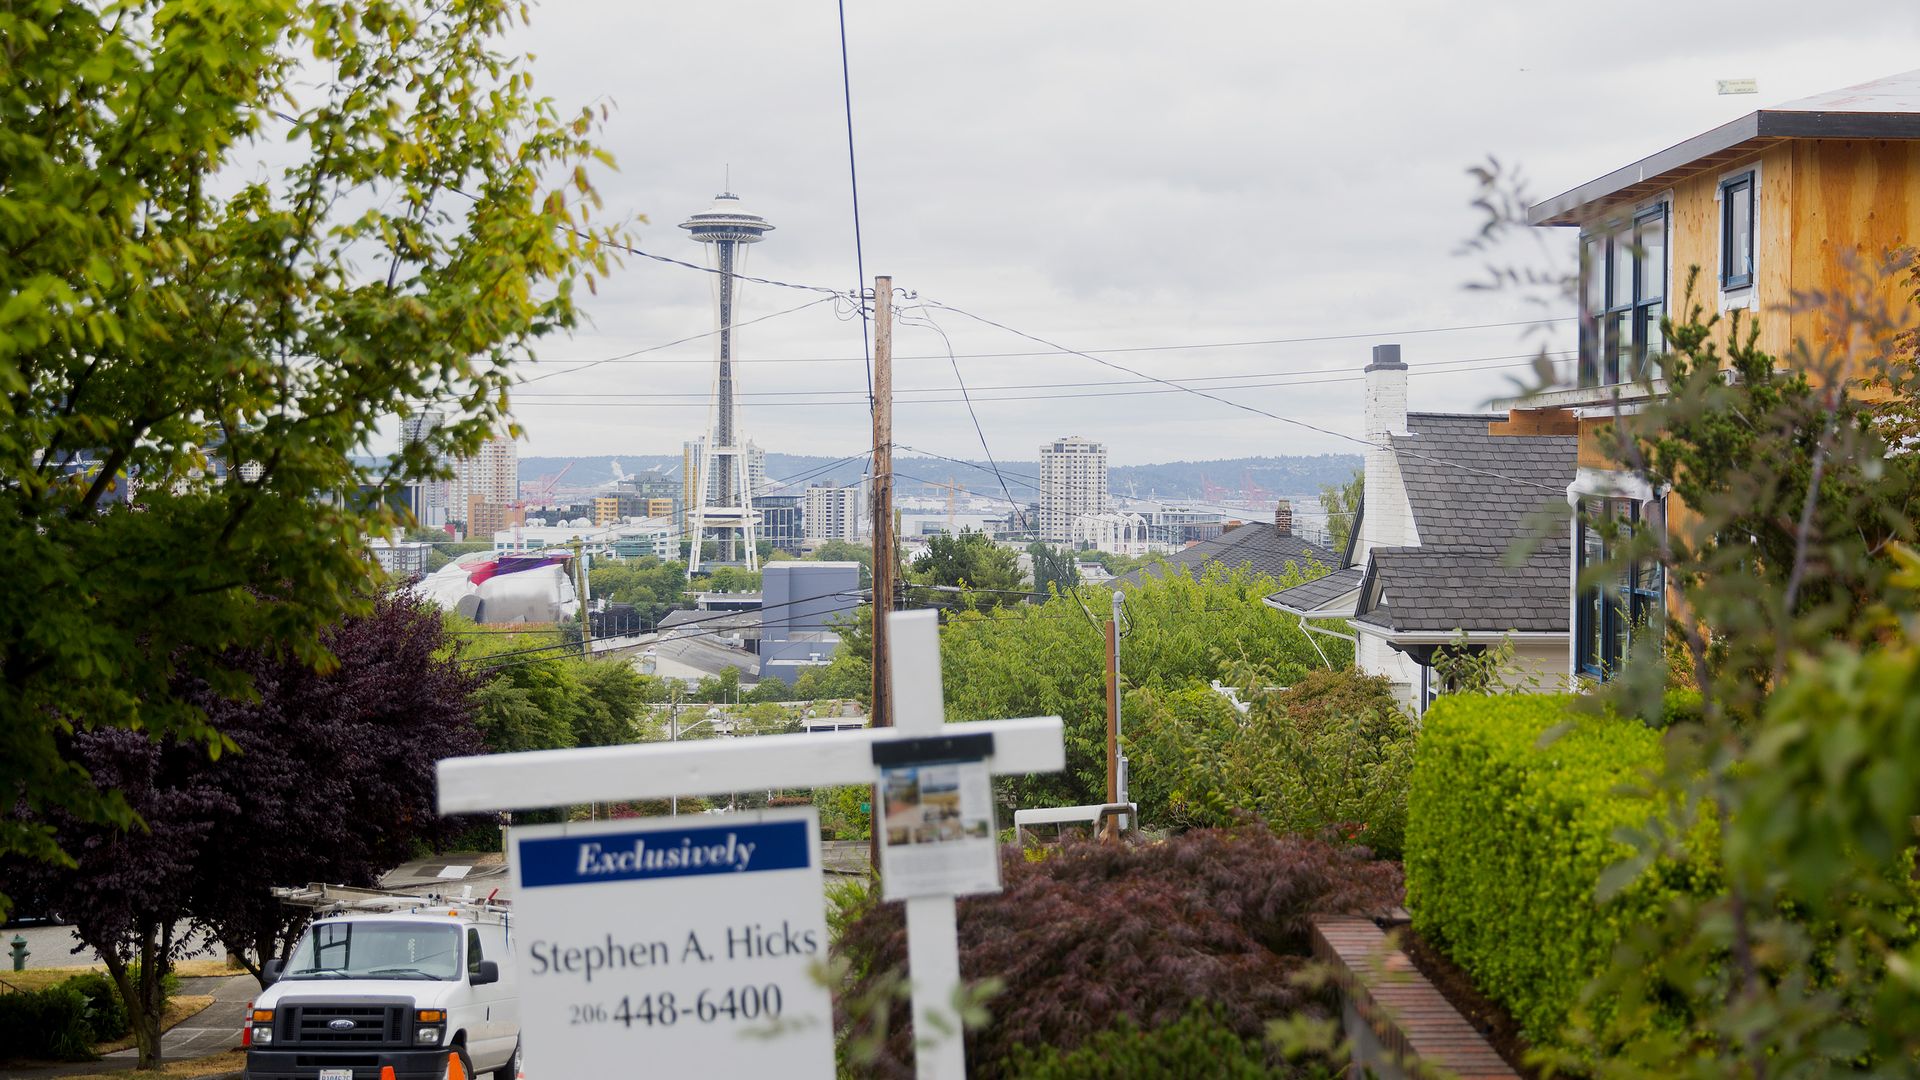 For sale sign in front of house with Seattle Space Needle in background